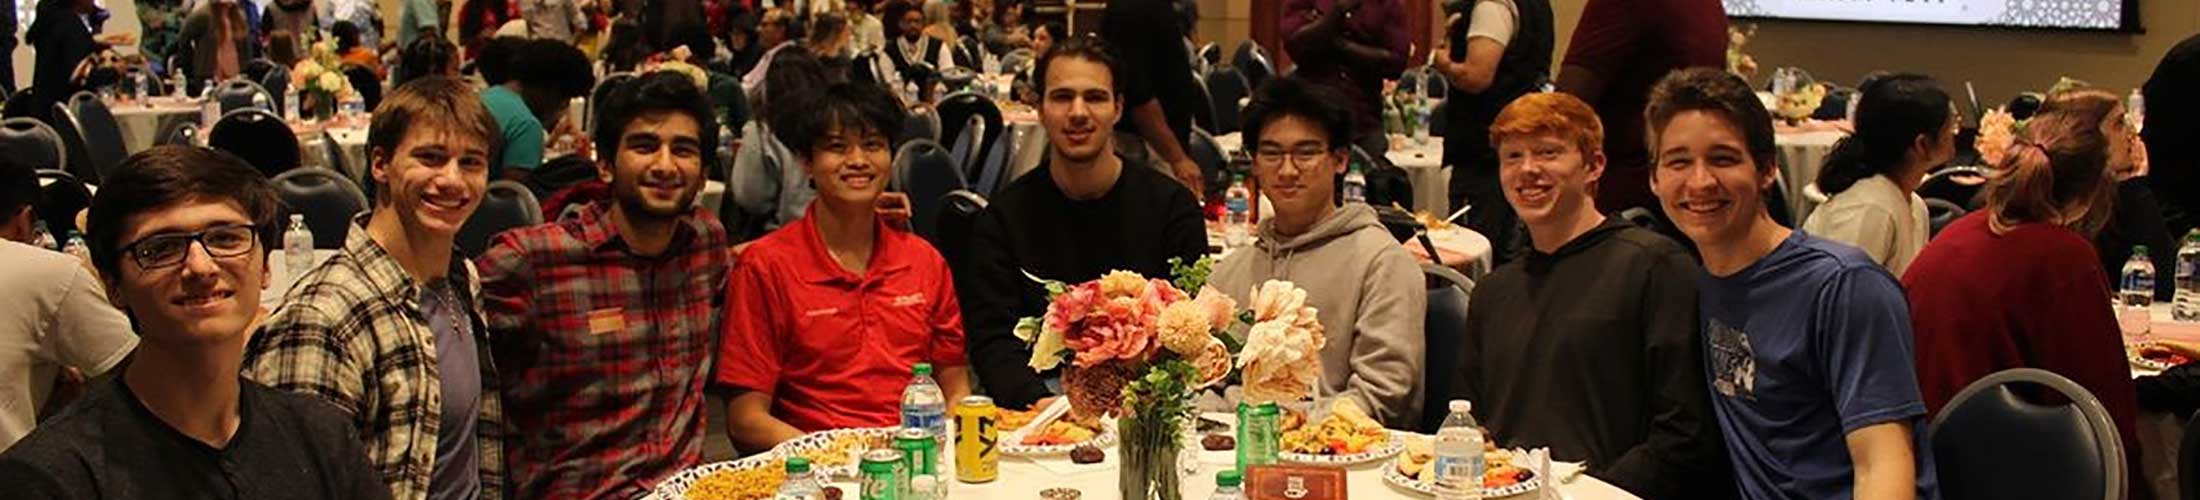 Group of students sitting at a round table eating at event.